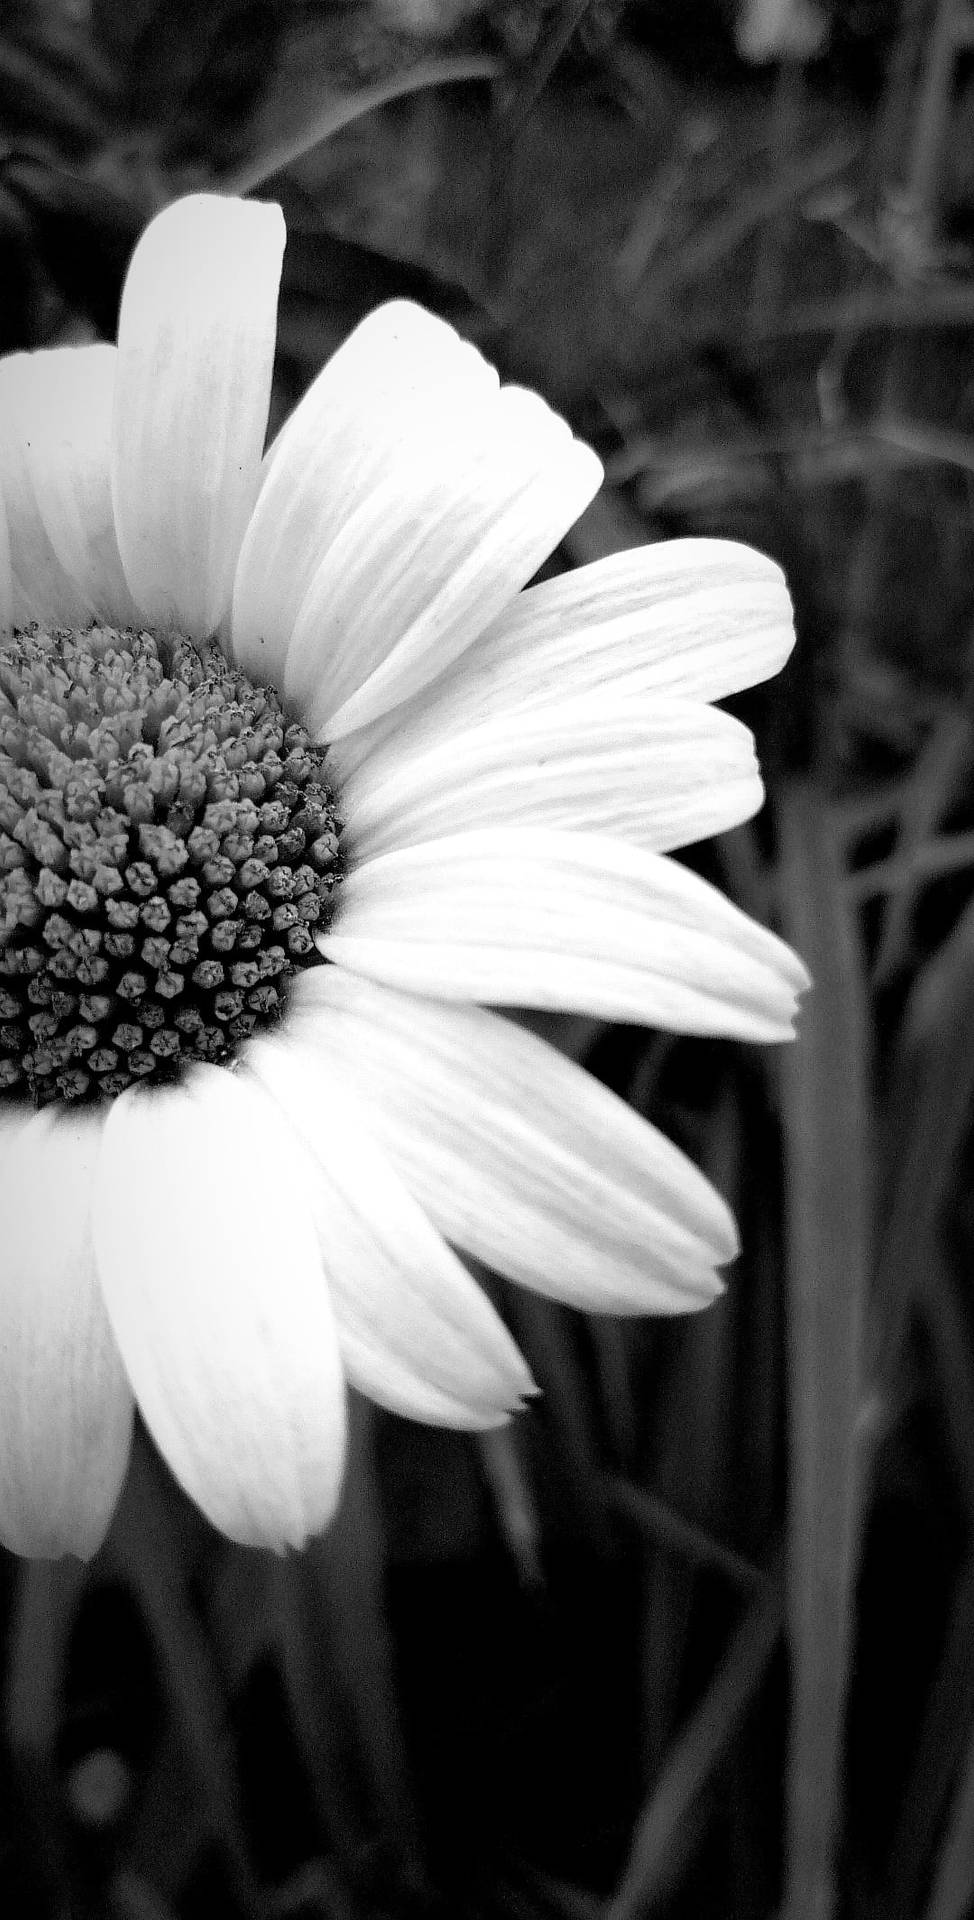 Black And White Flower And Grass Background